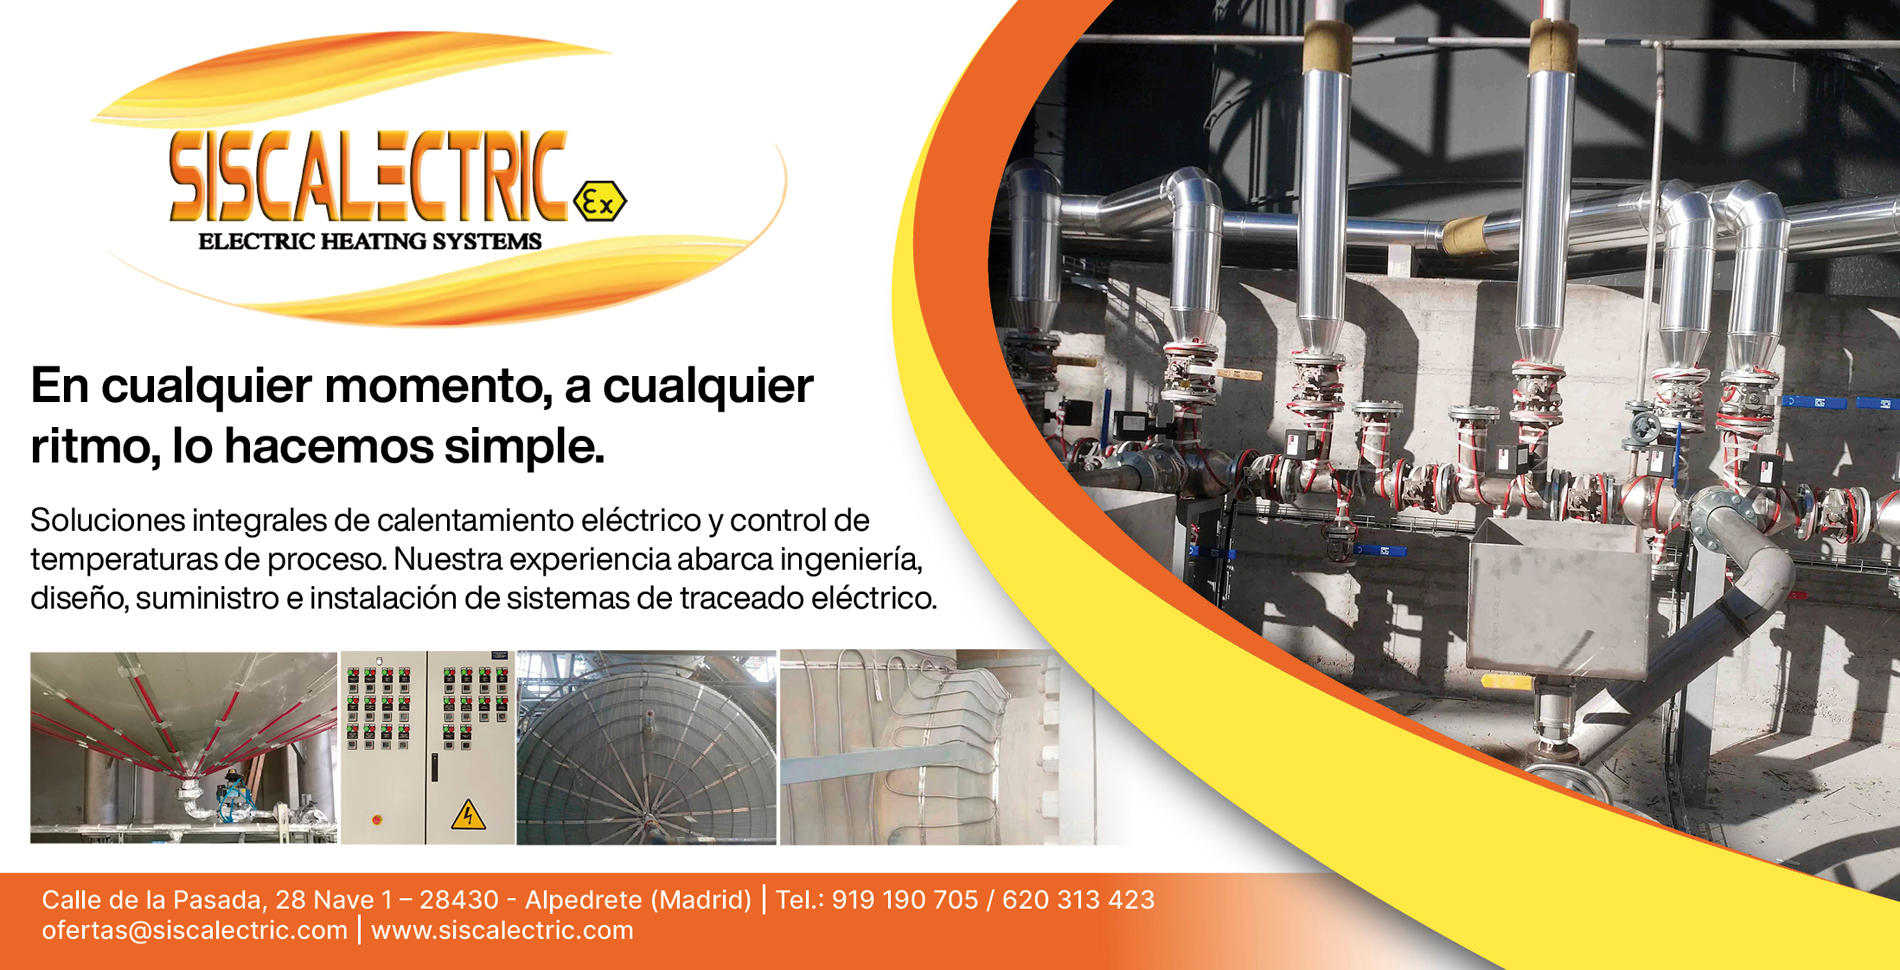 Images Siscalectric  Electric Heating Systems